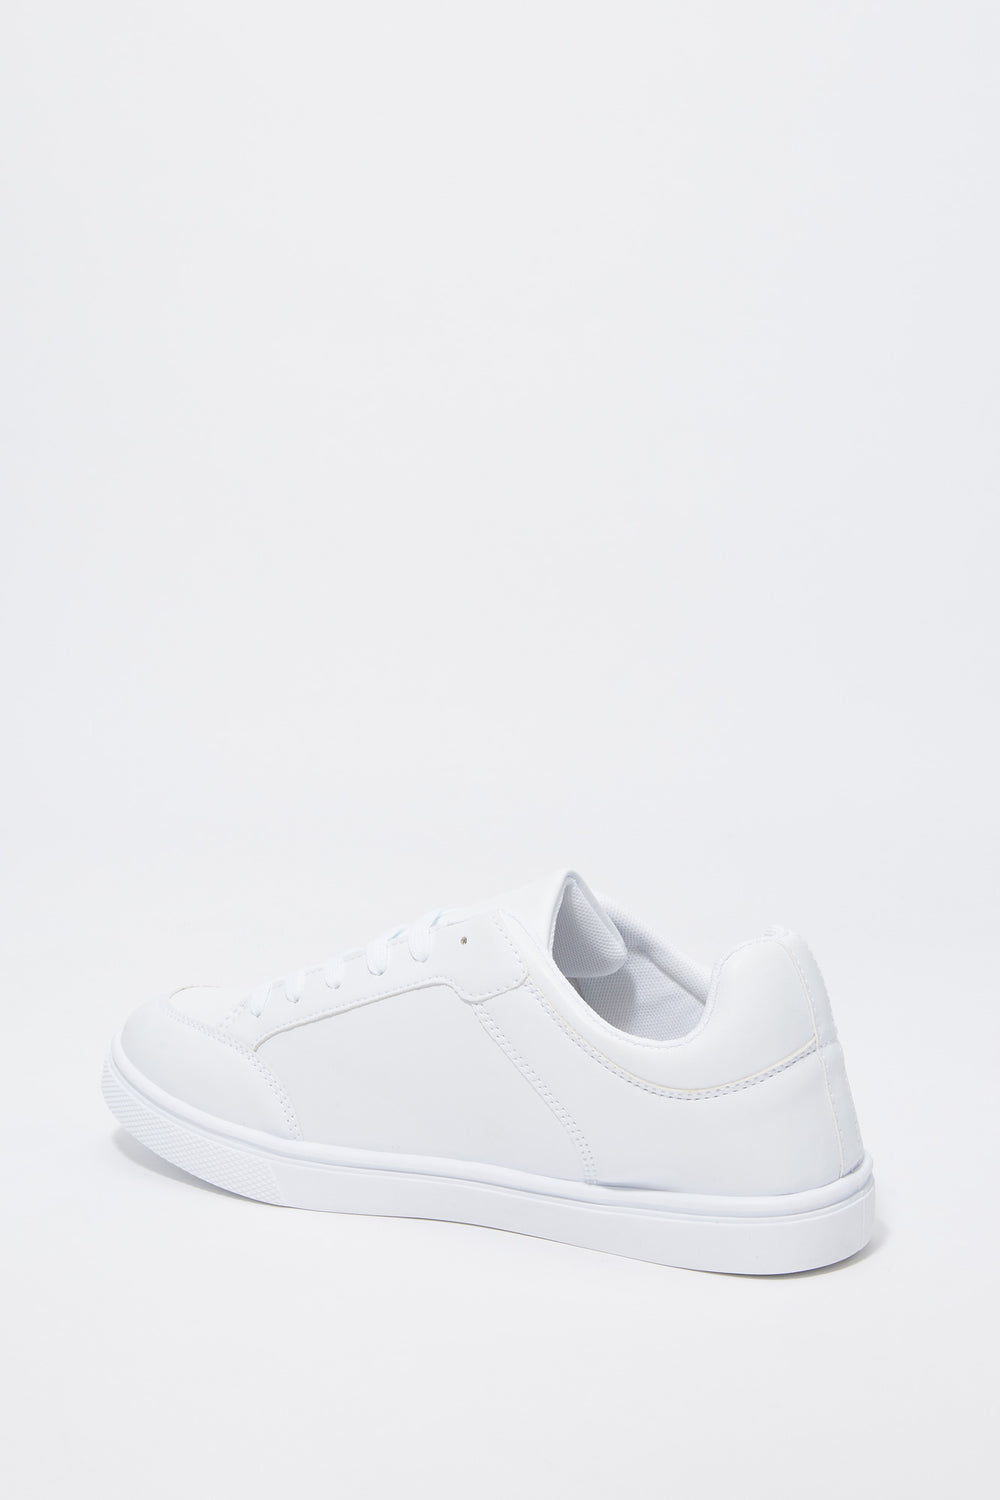 Low Top Casual Canvas Sneaker Low Top Casual Canvas Sneaker 14